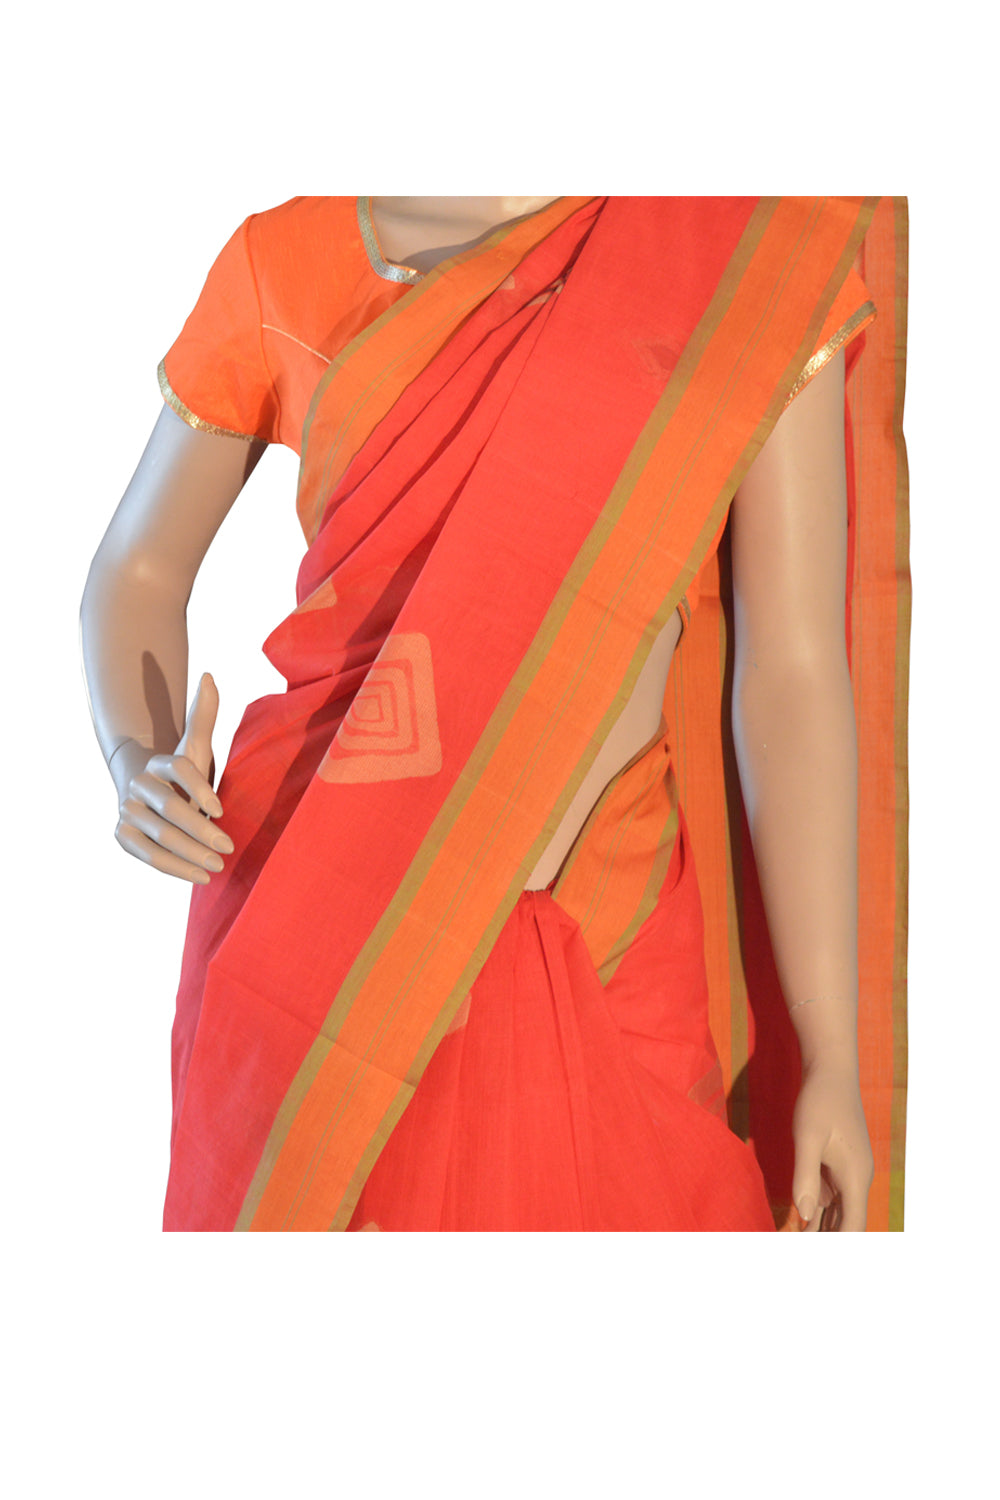 Southloom™ Premium Handloom South Cotton Red Saree With Square Design